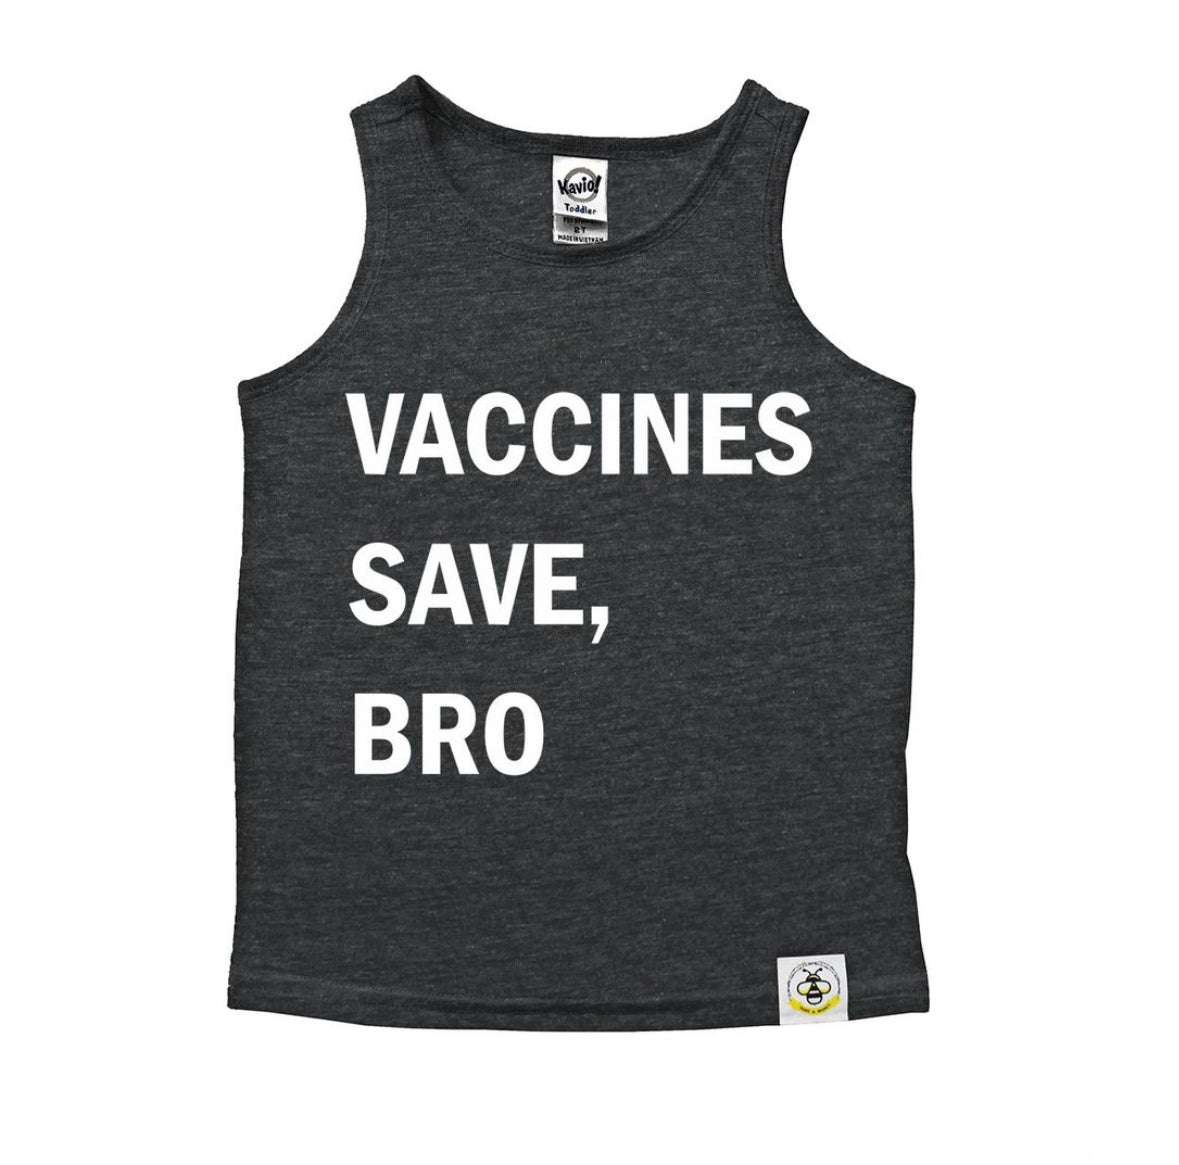 Vaccines Save, Bro (Youth)